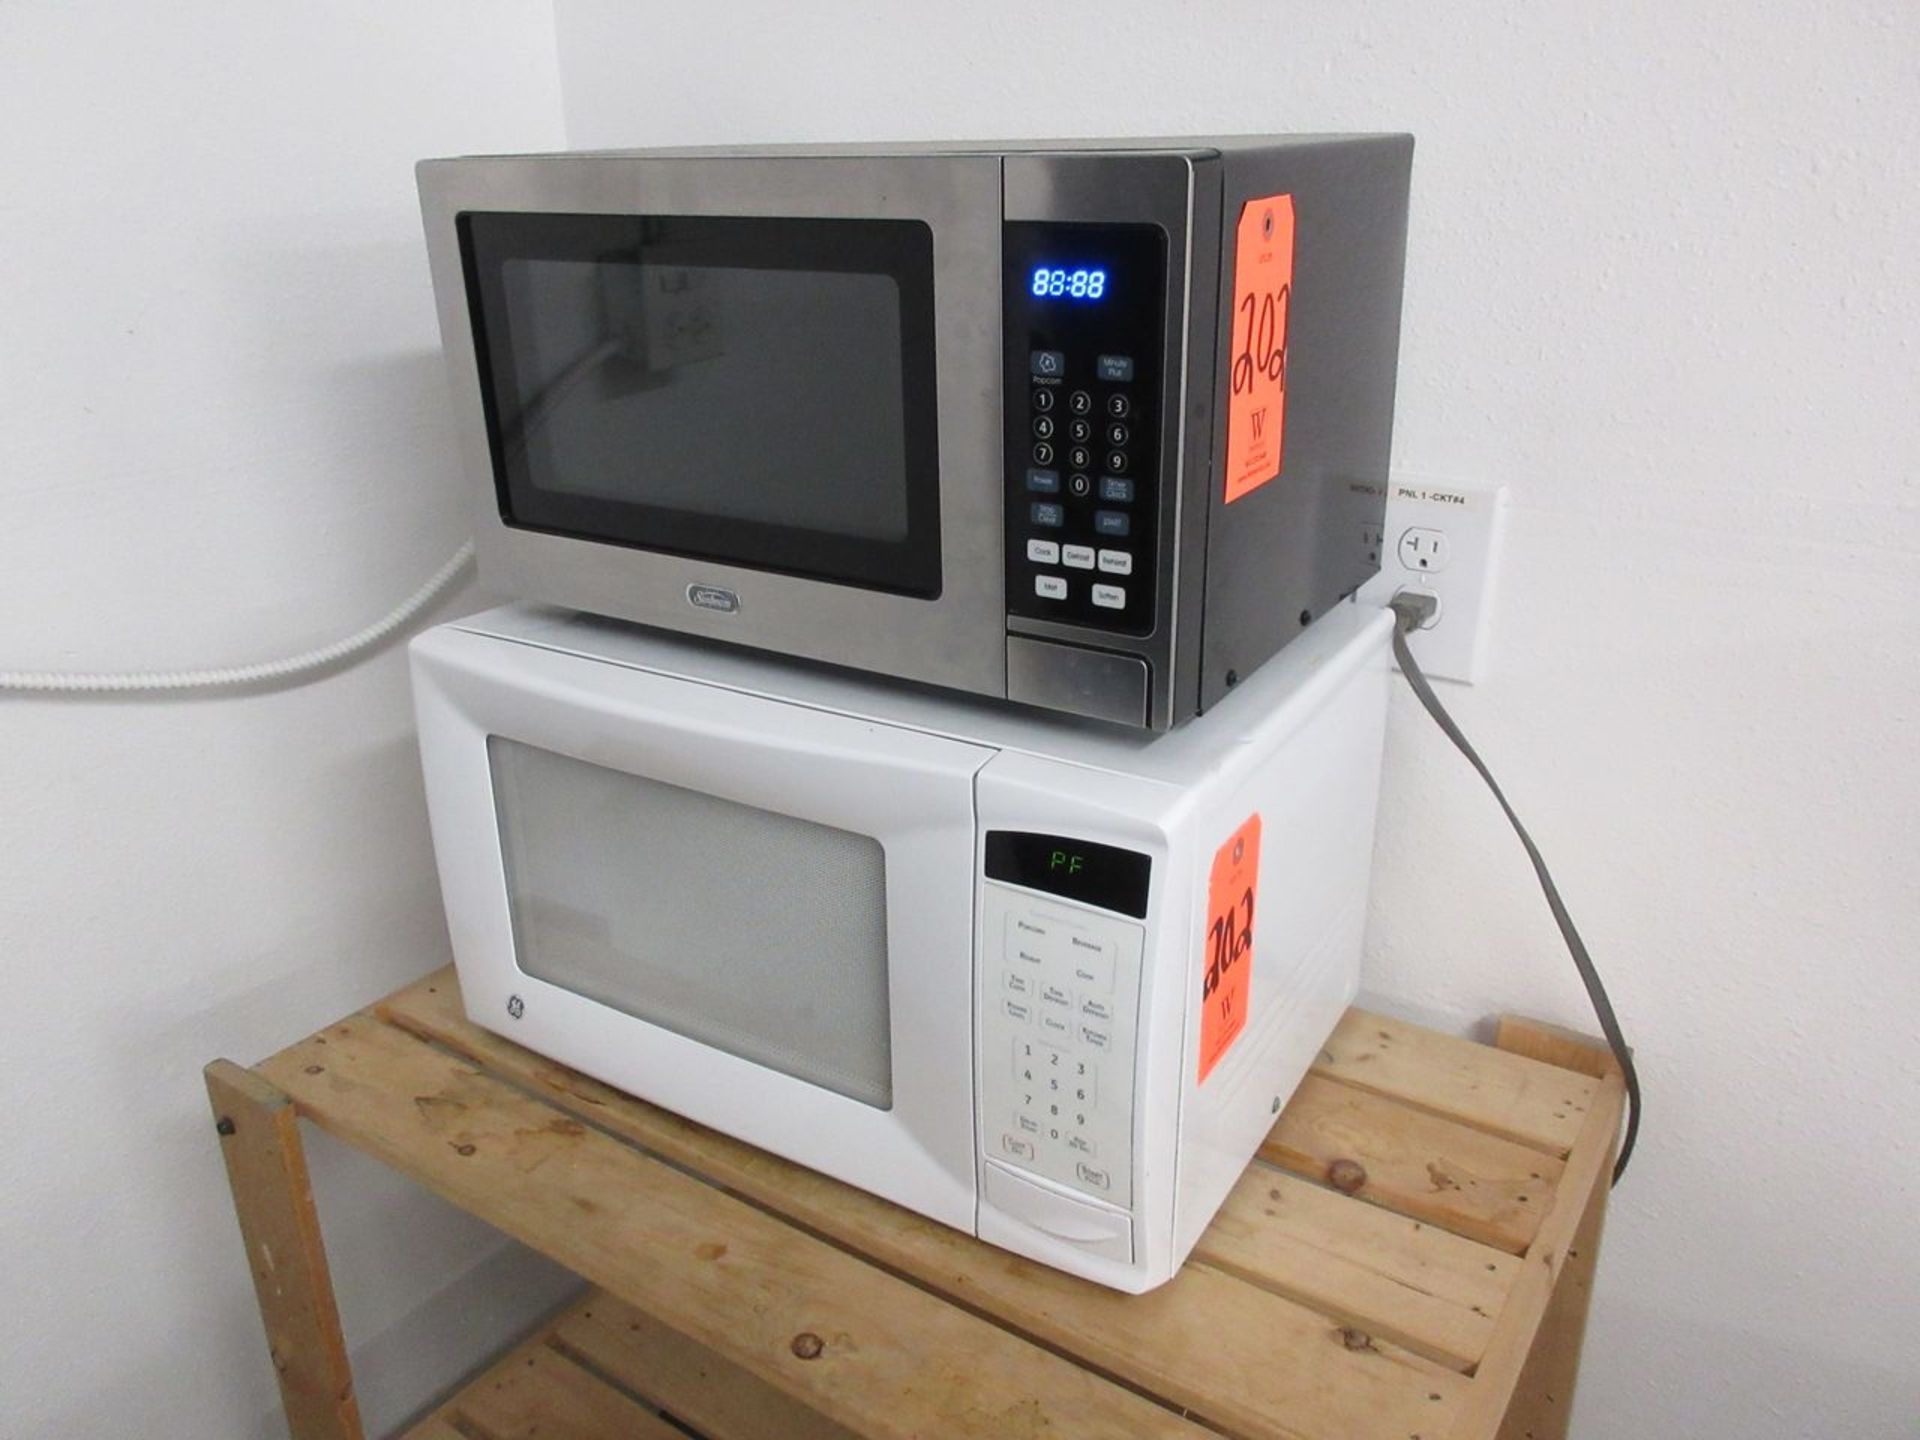 Lot - (2) Microwave Ovens; (1) Sunbeam and (1) GE